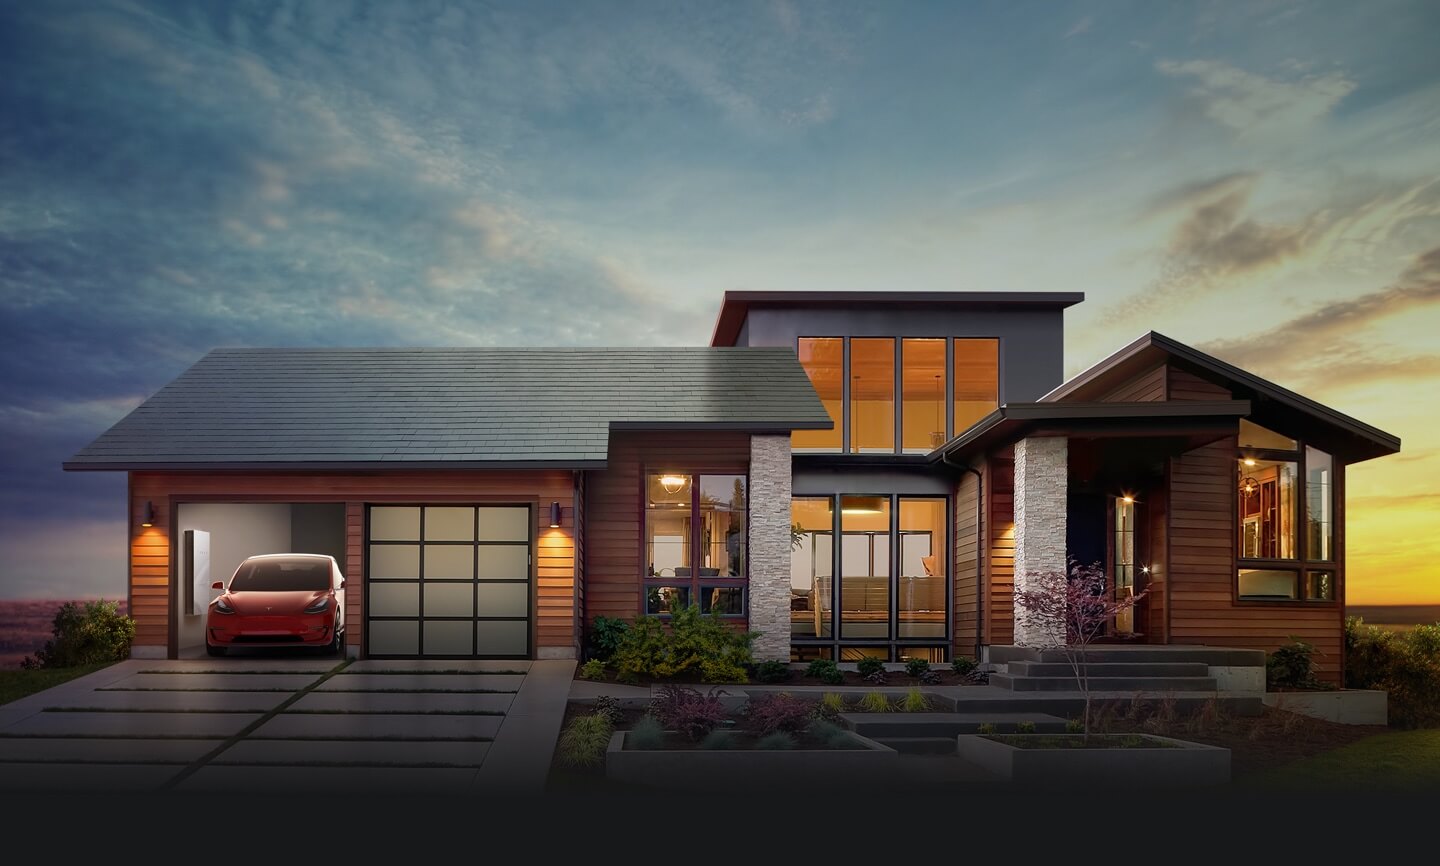 Tesla's Solar roof on a luxury home.